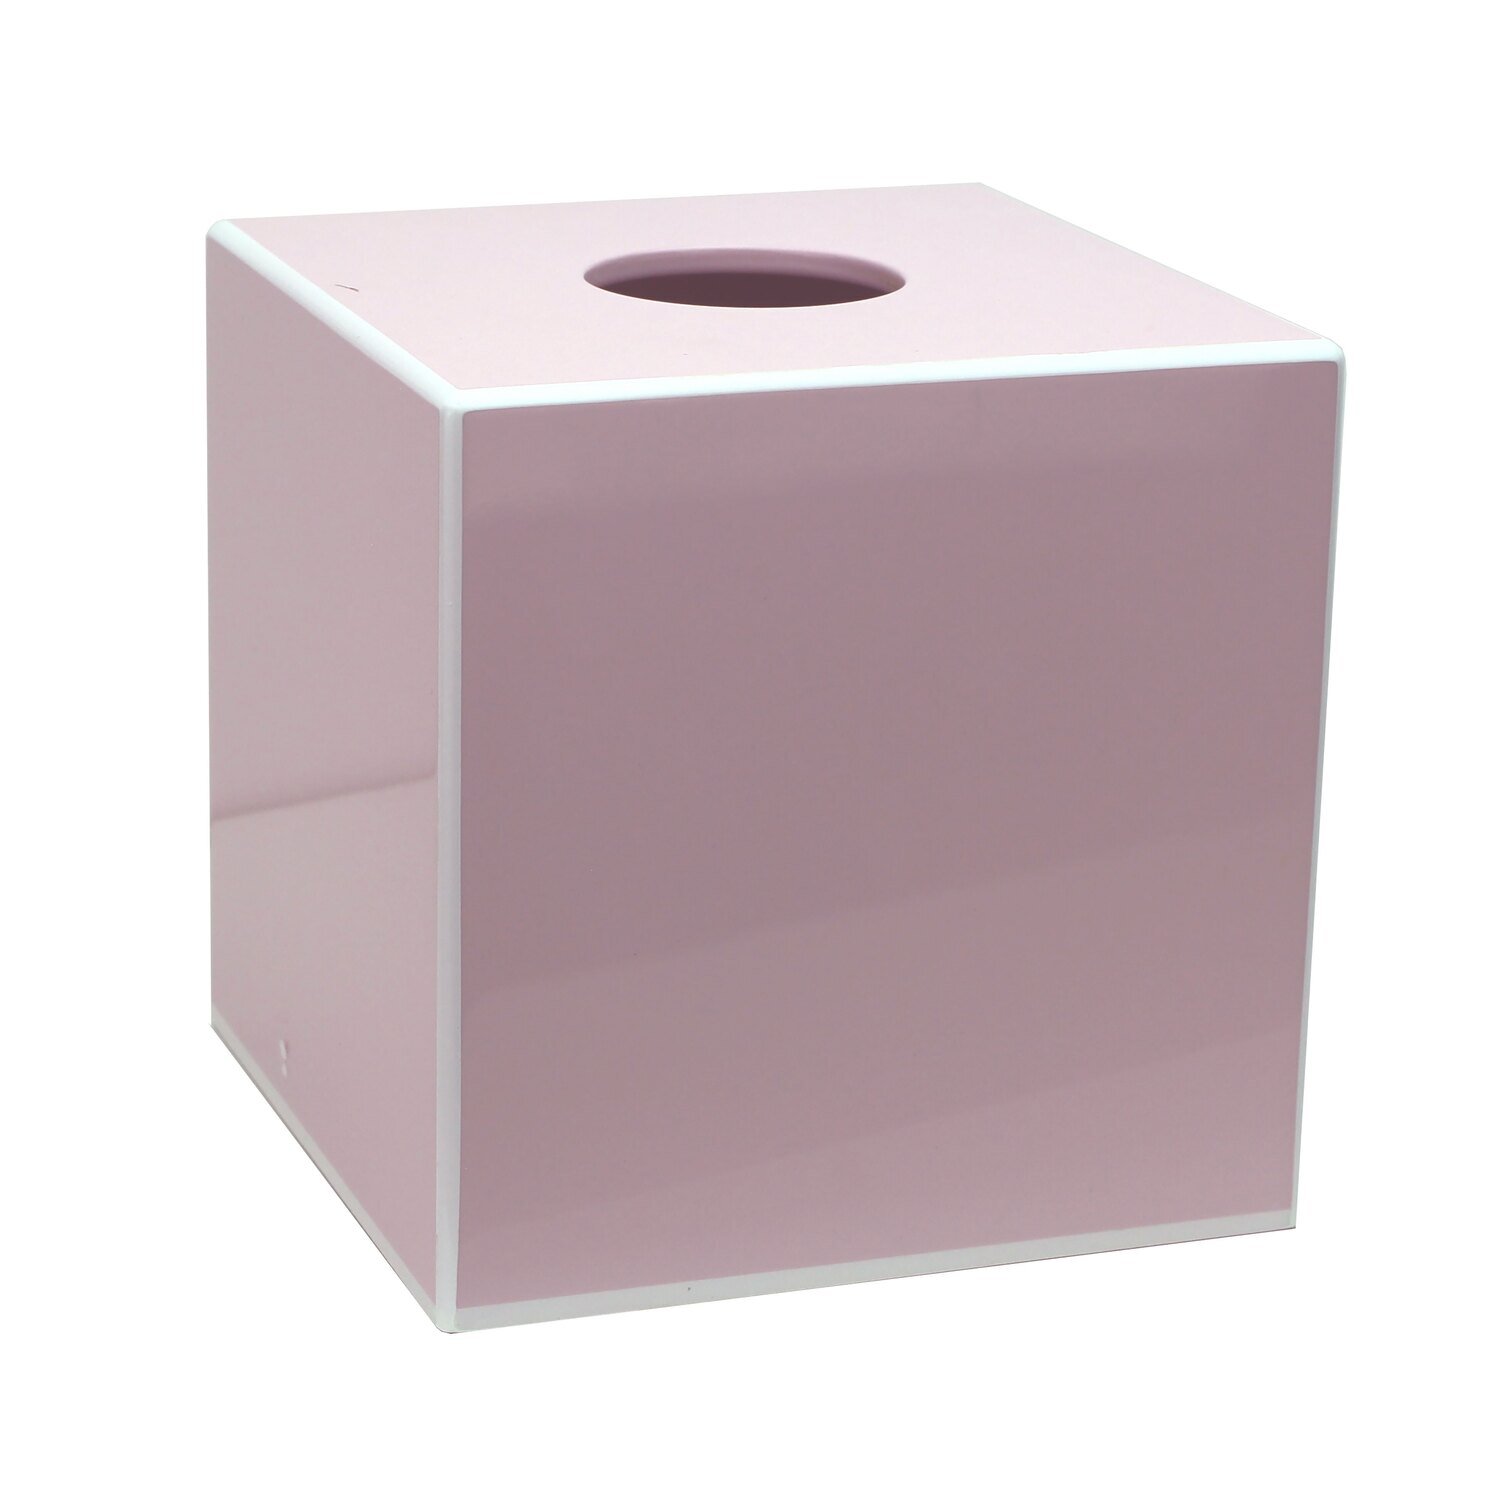 Addison Ross Tissue Box 5.5 x 5 Inch.5 Light Pink Lacquer TB1501